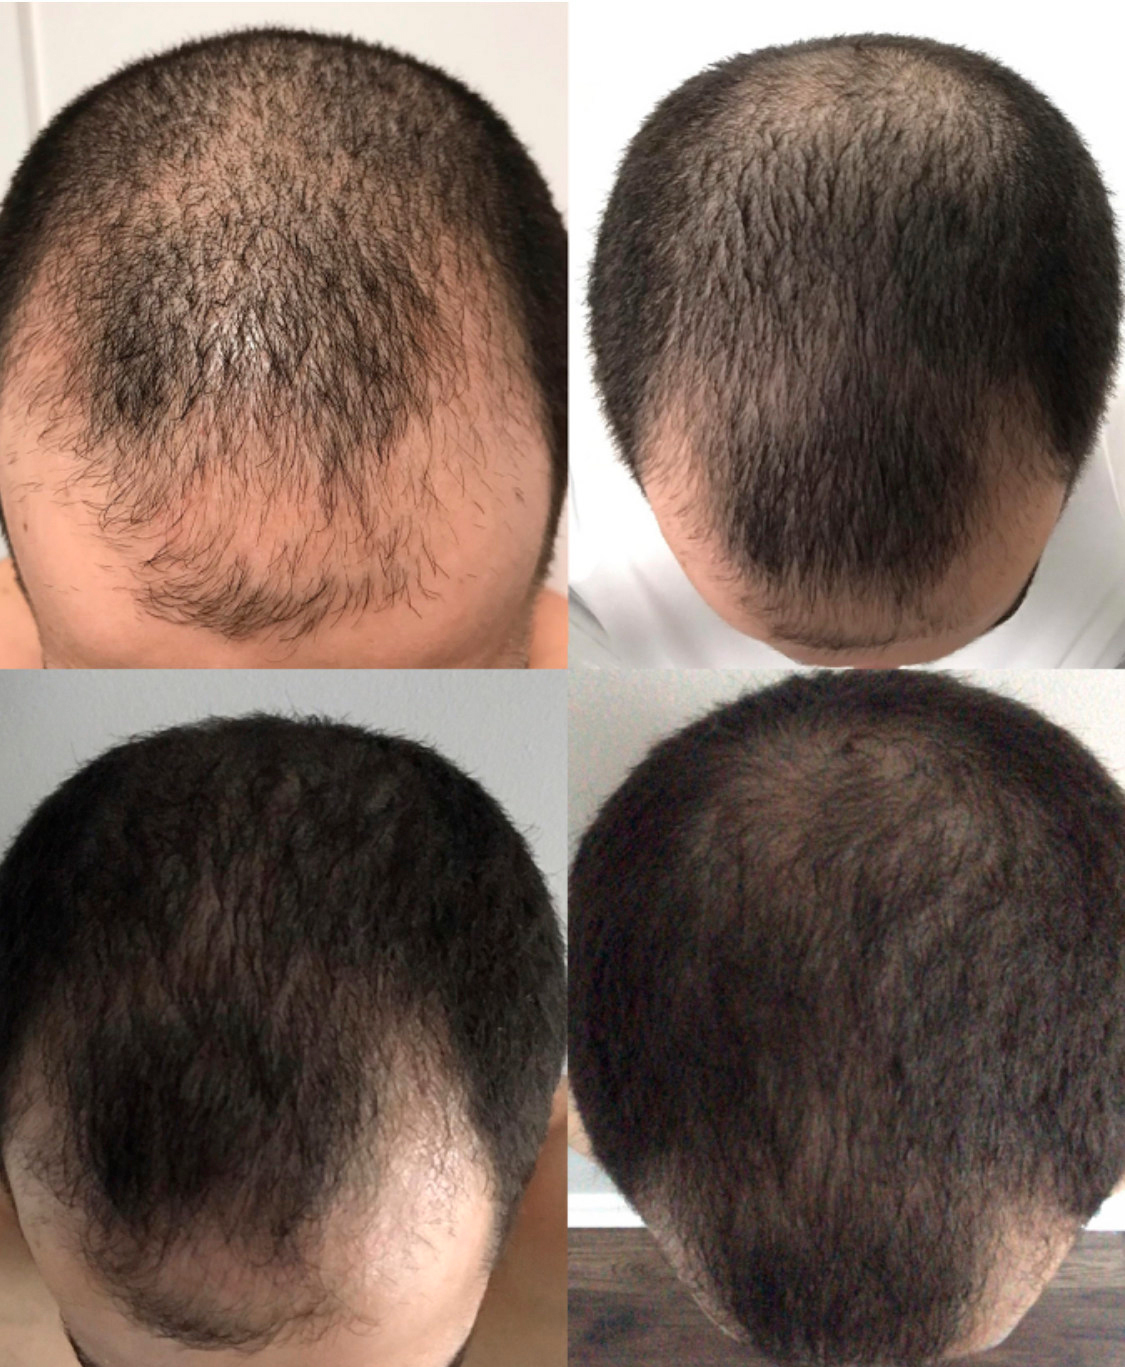 Before and after of hair rejuvenation in Scottsdale, AZ